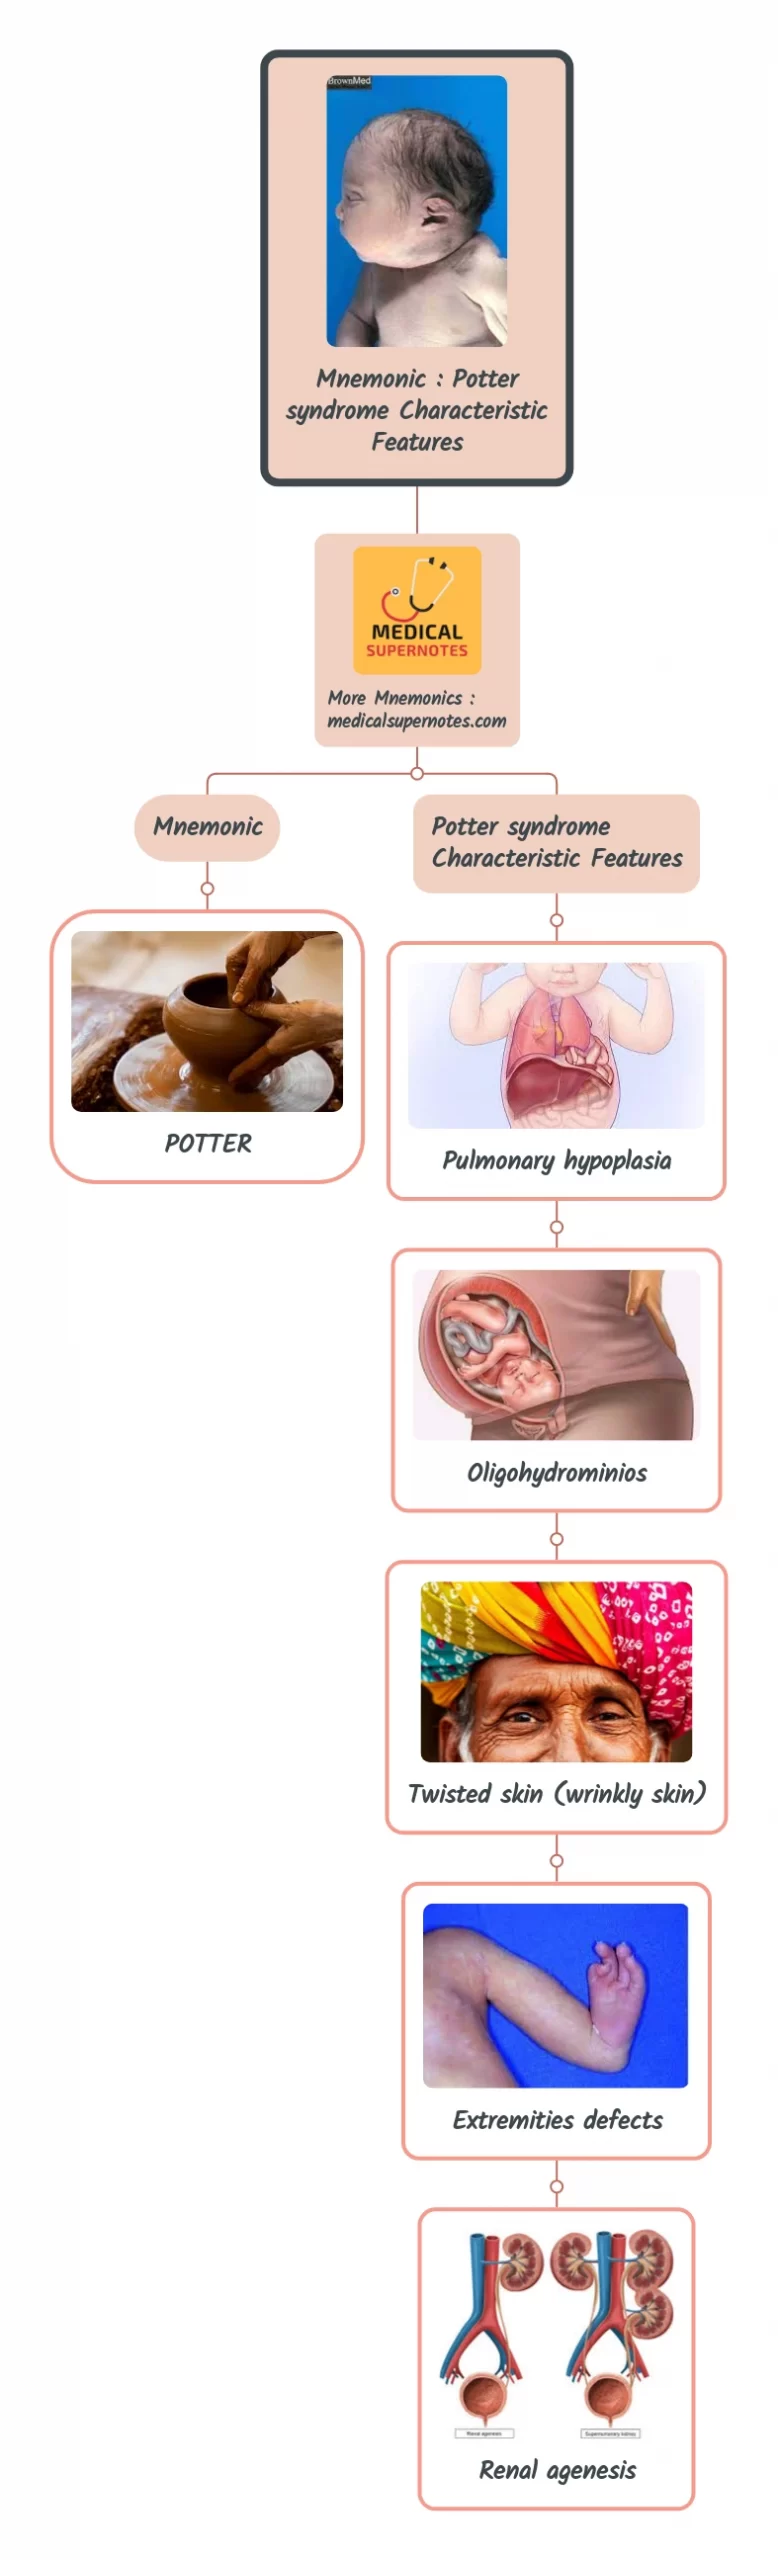 Mnemonic _ Potter syndrome Characteristic Features